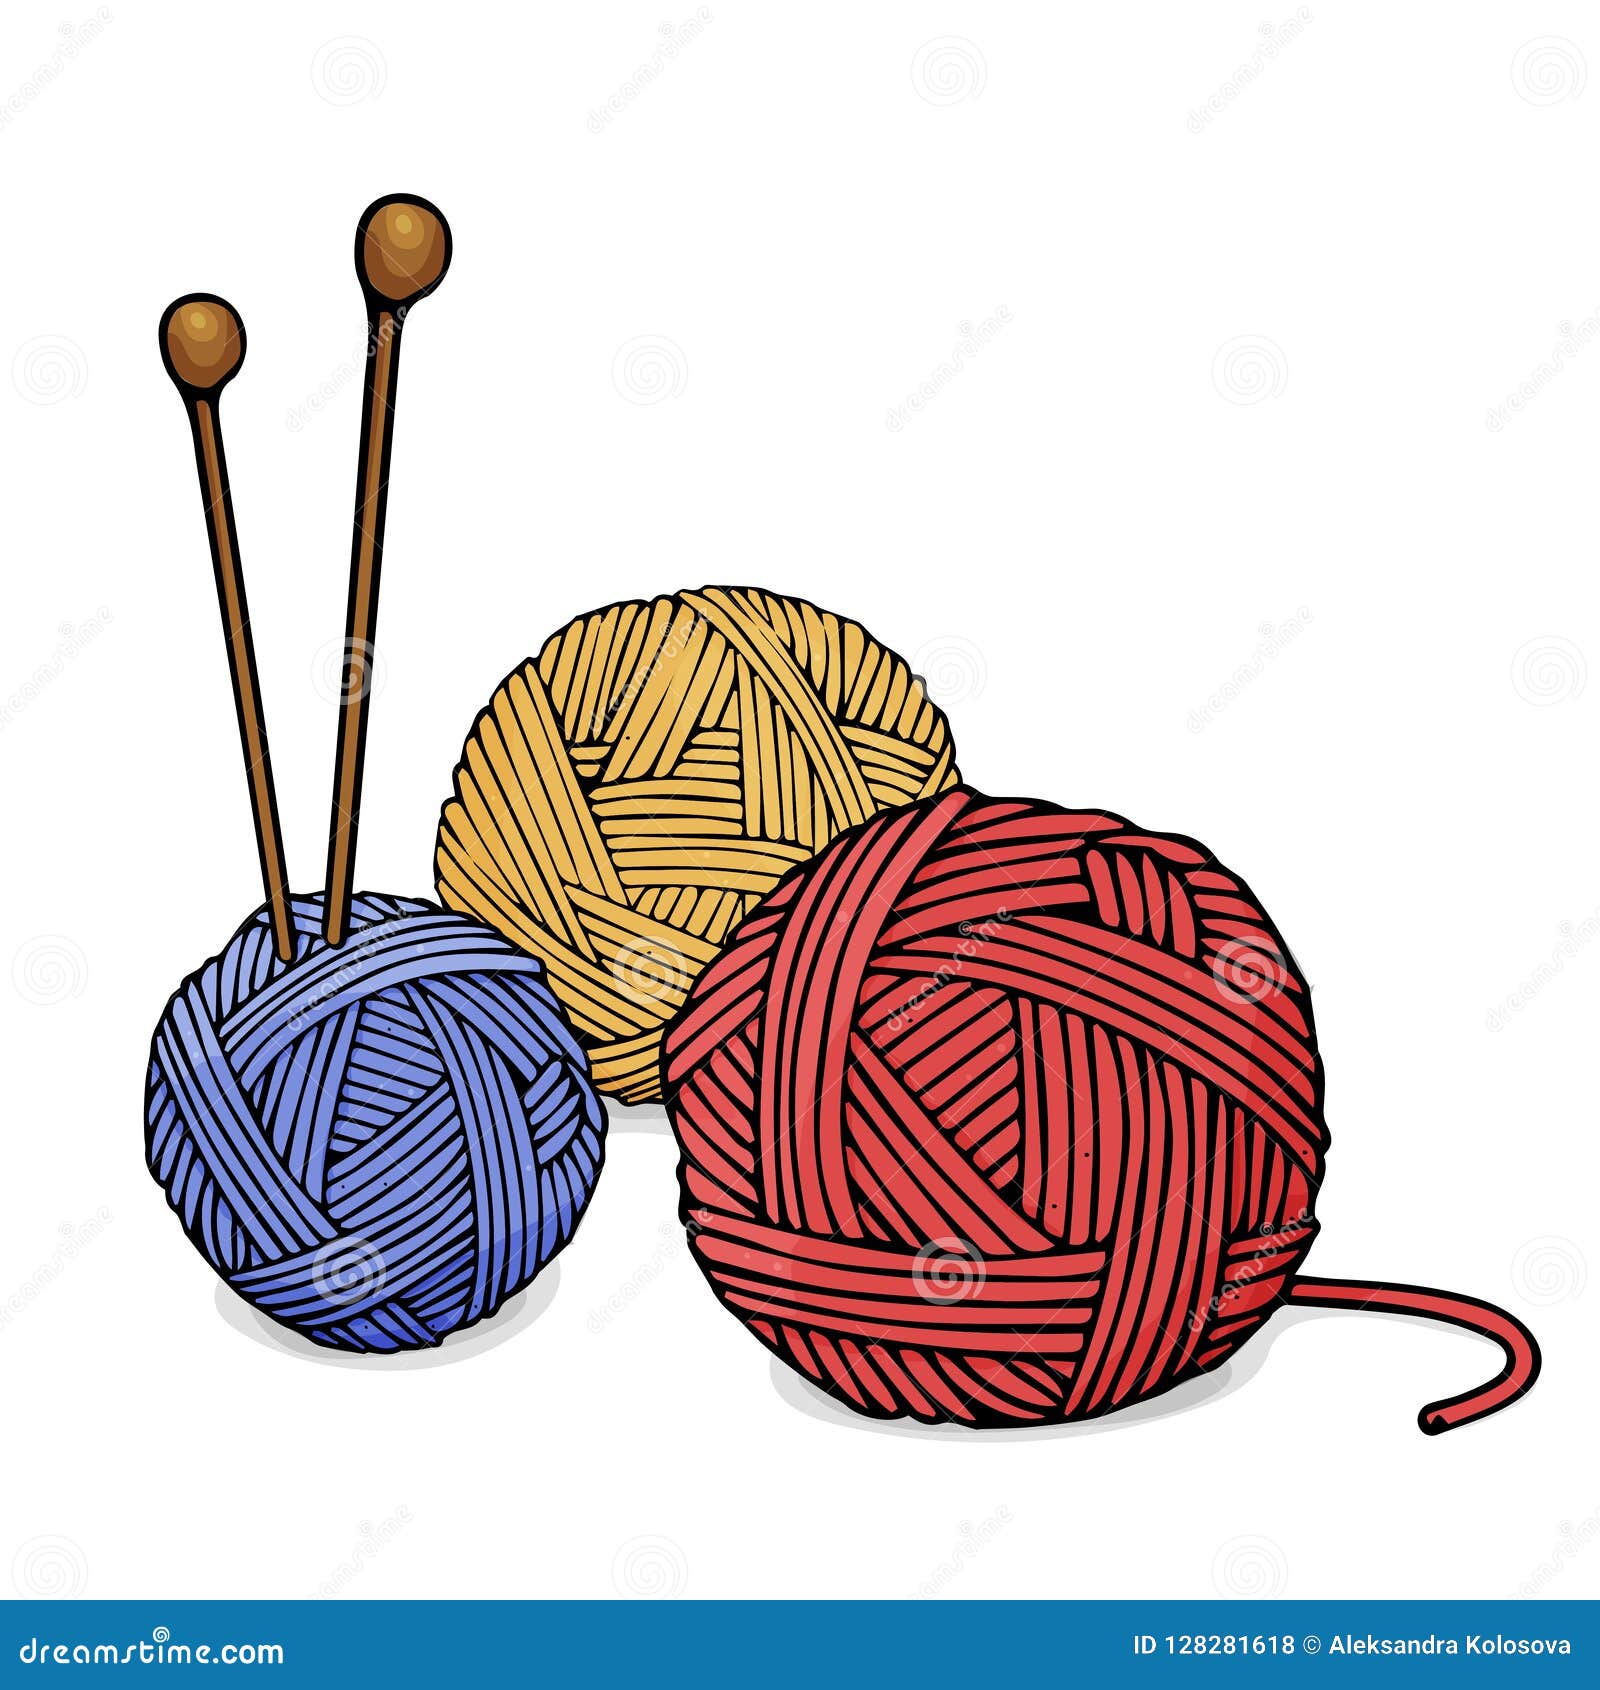 Tangles of Different Colors of Wool for Knitting and Knitting Needles ...